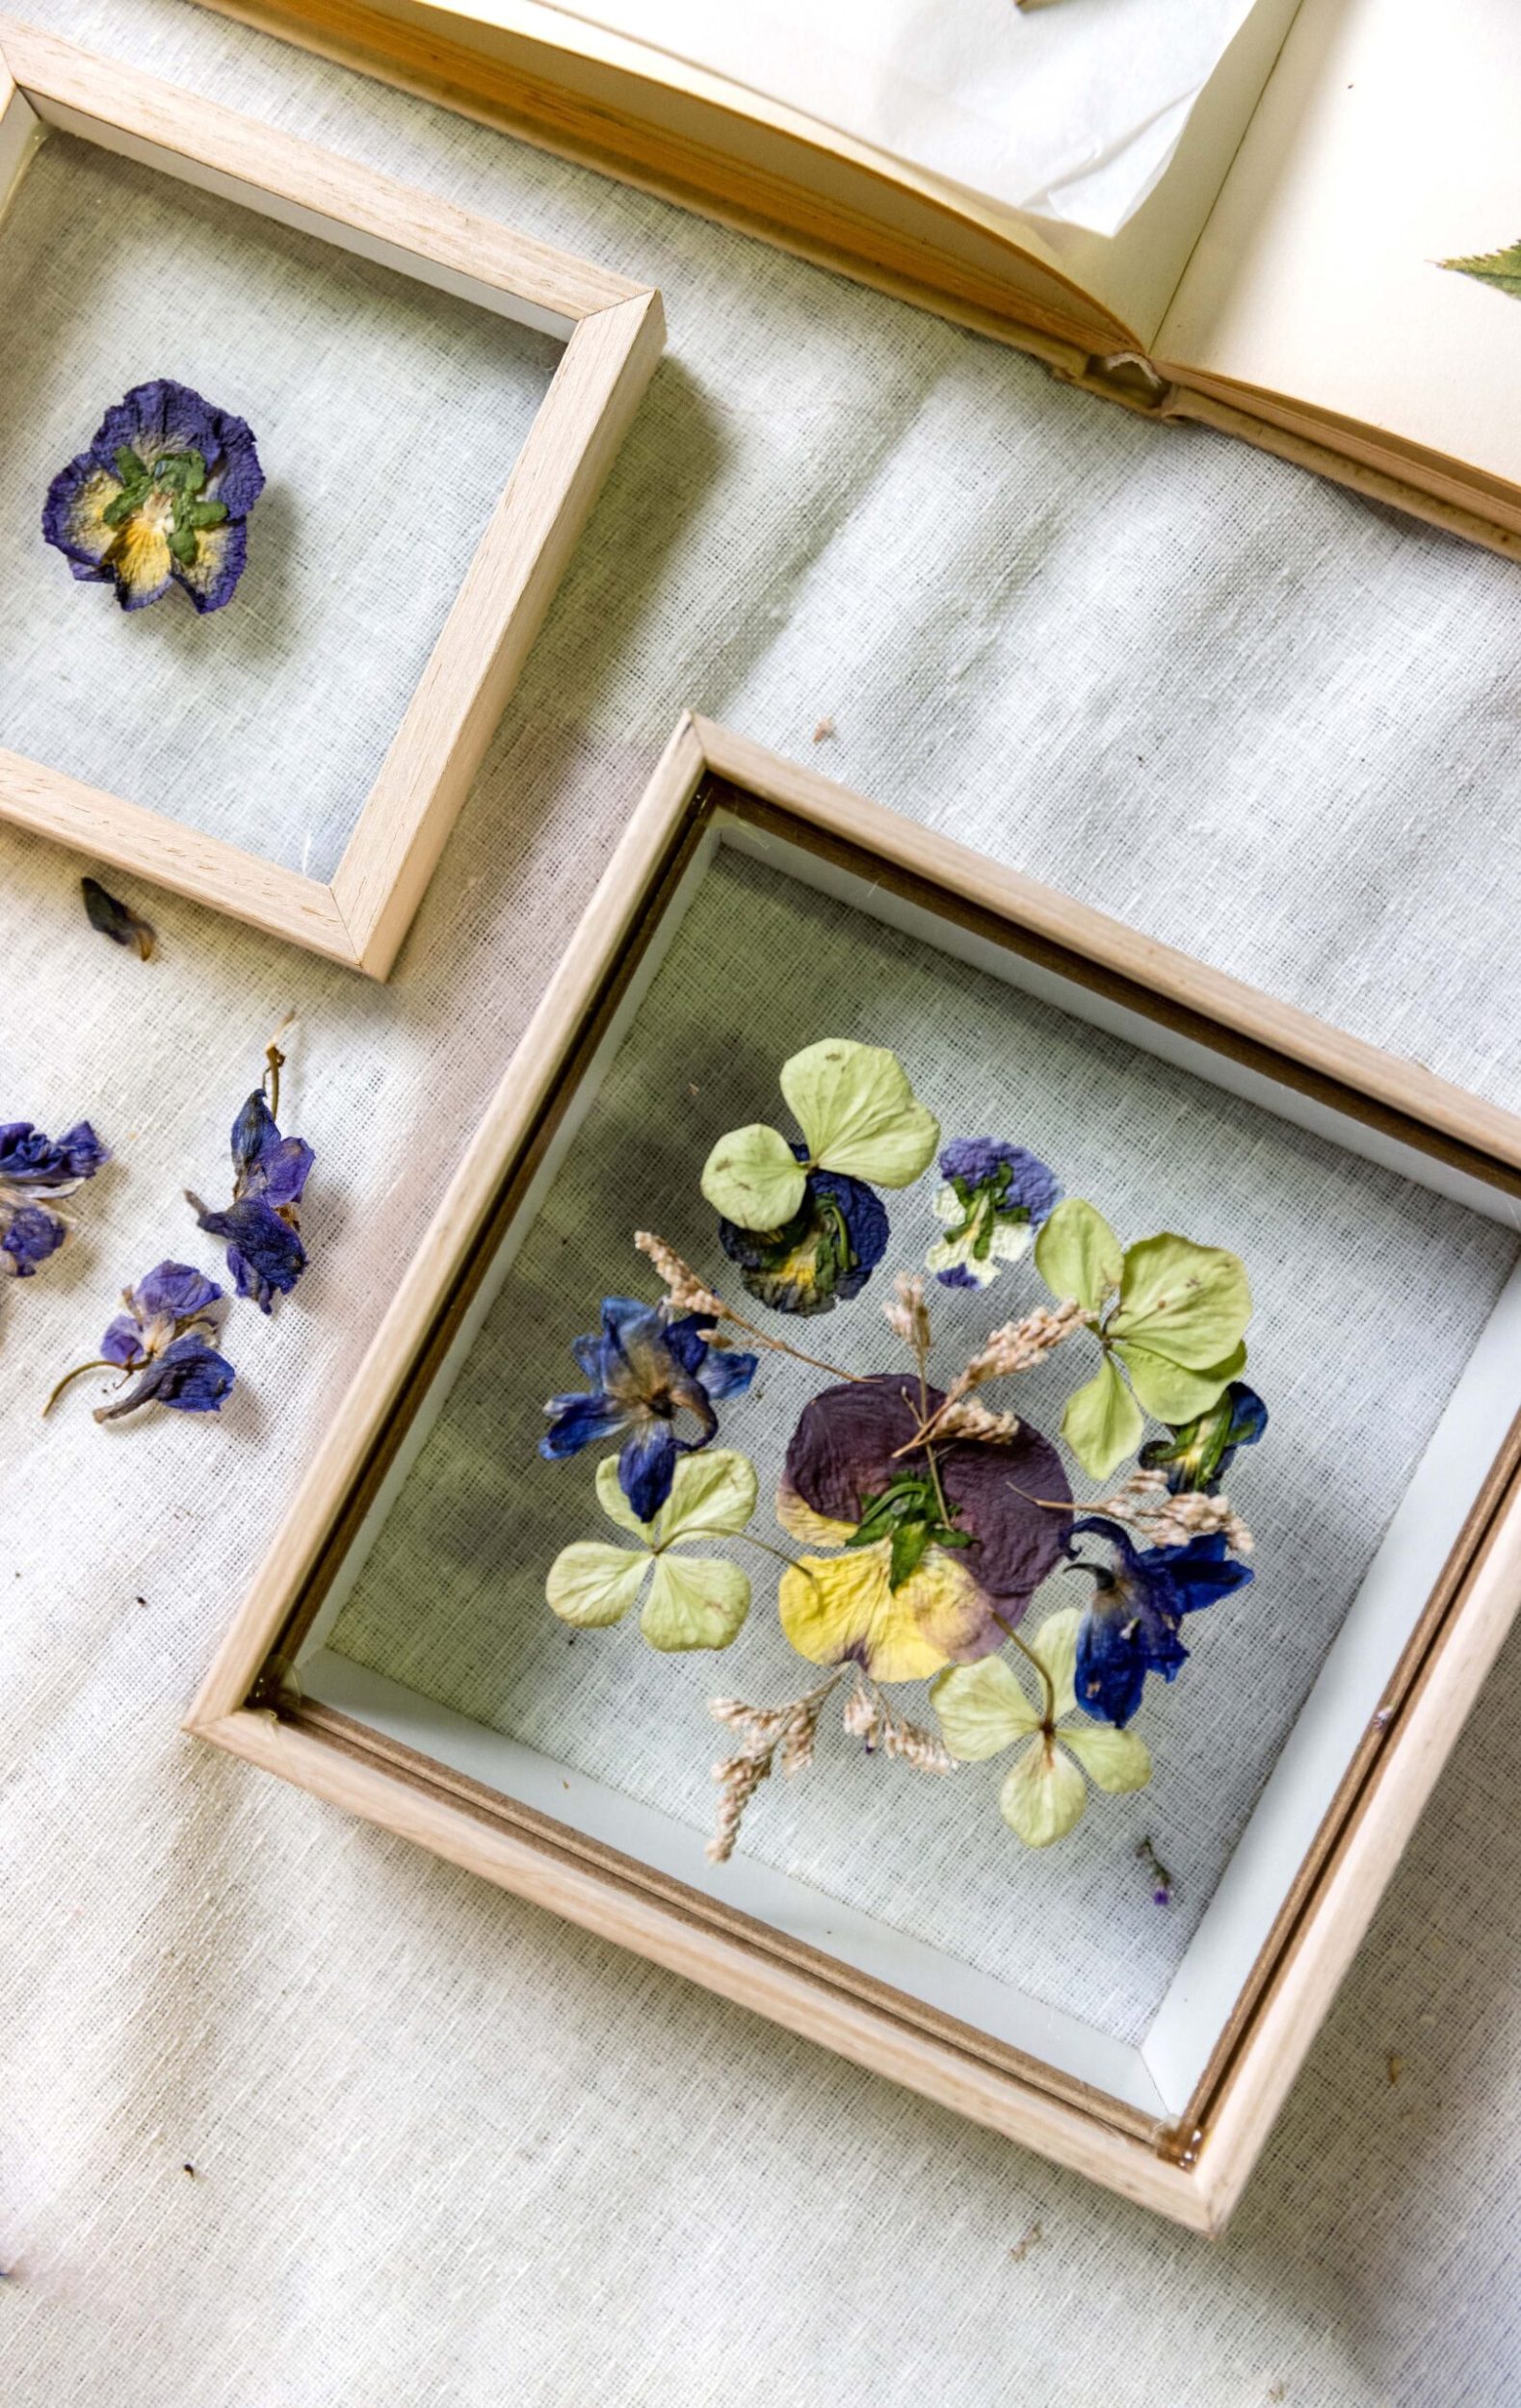 A small wood frame with a glass centre holding pressed petals